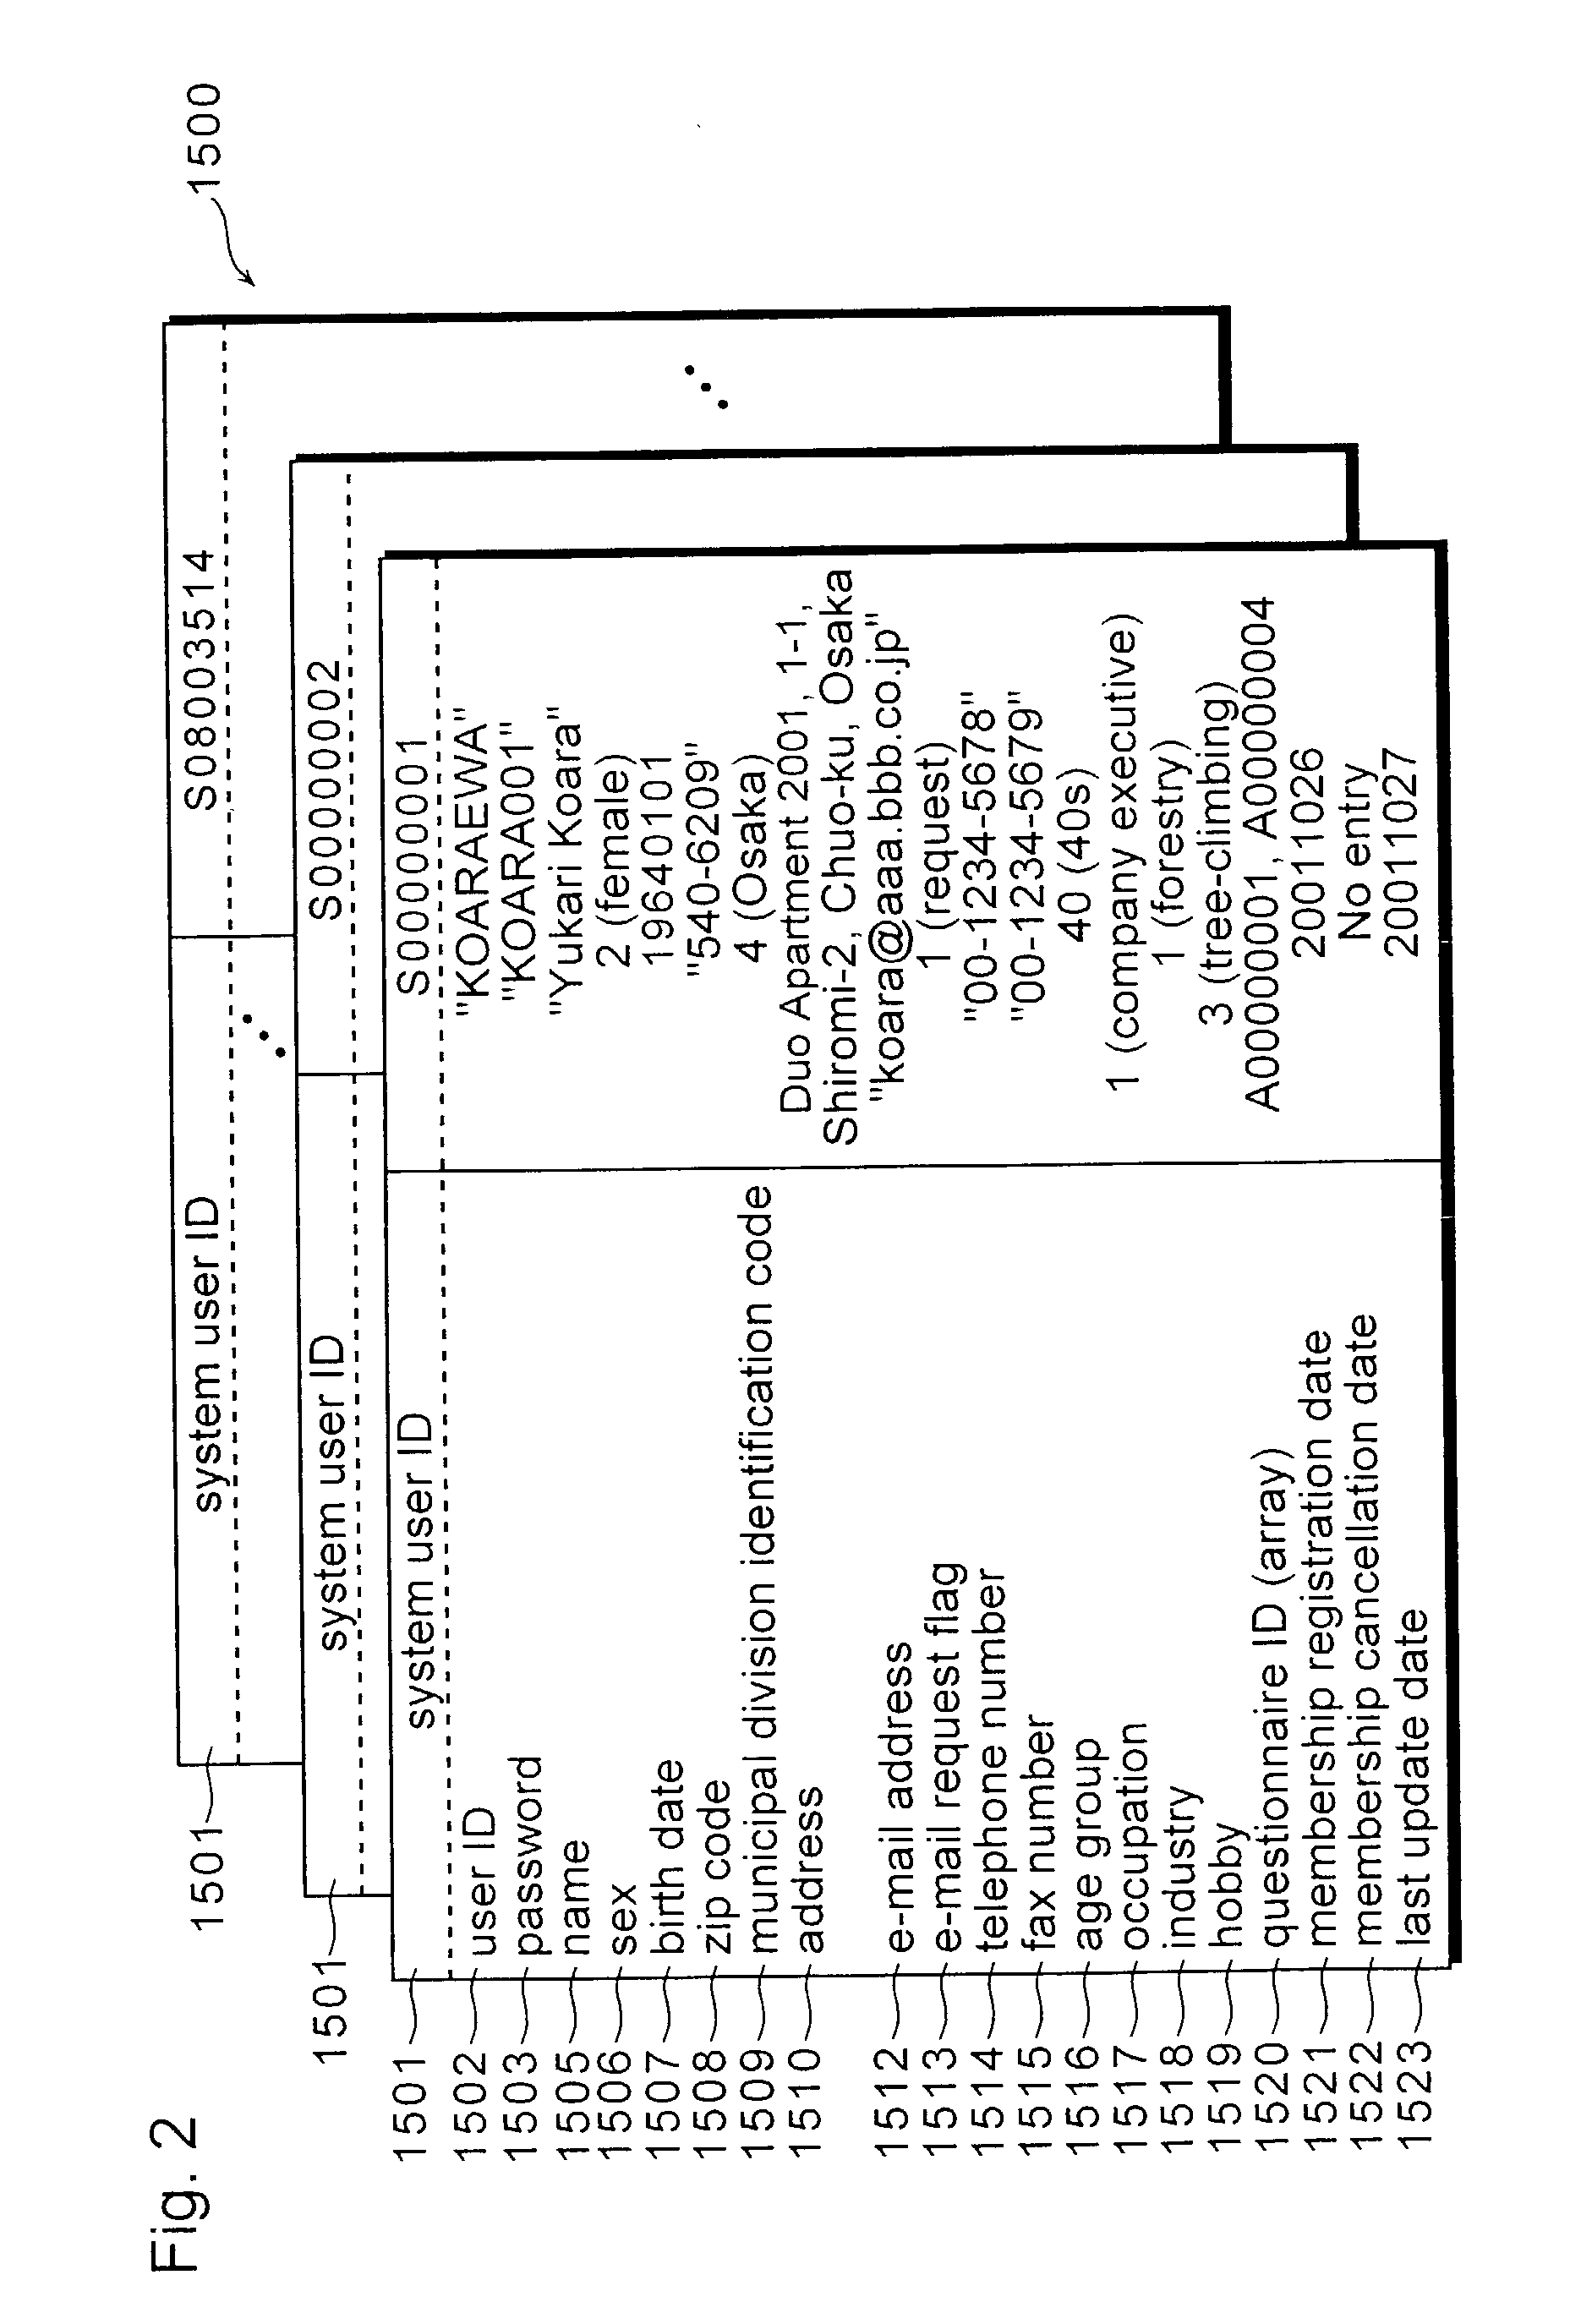 Product information management device